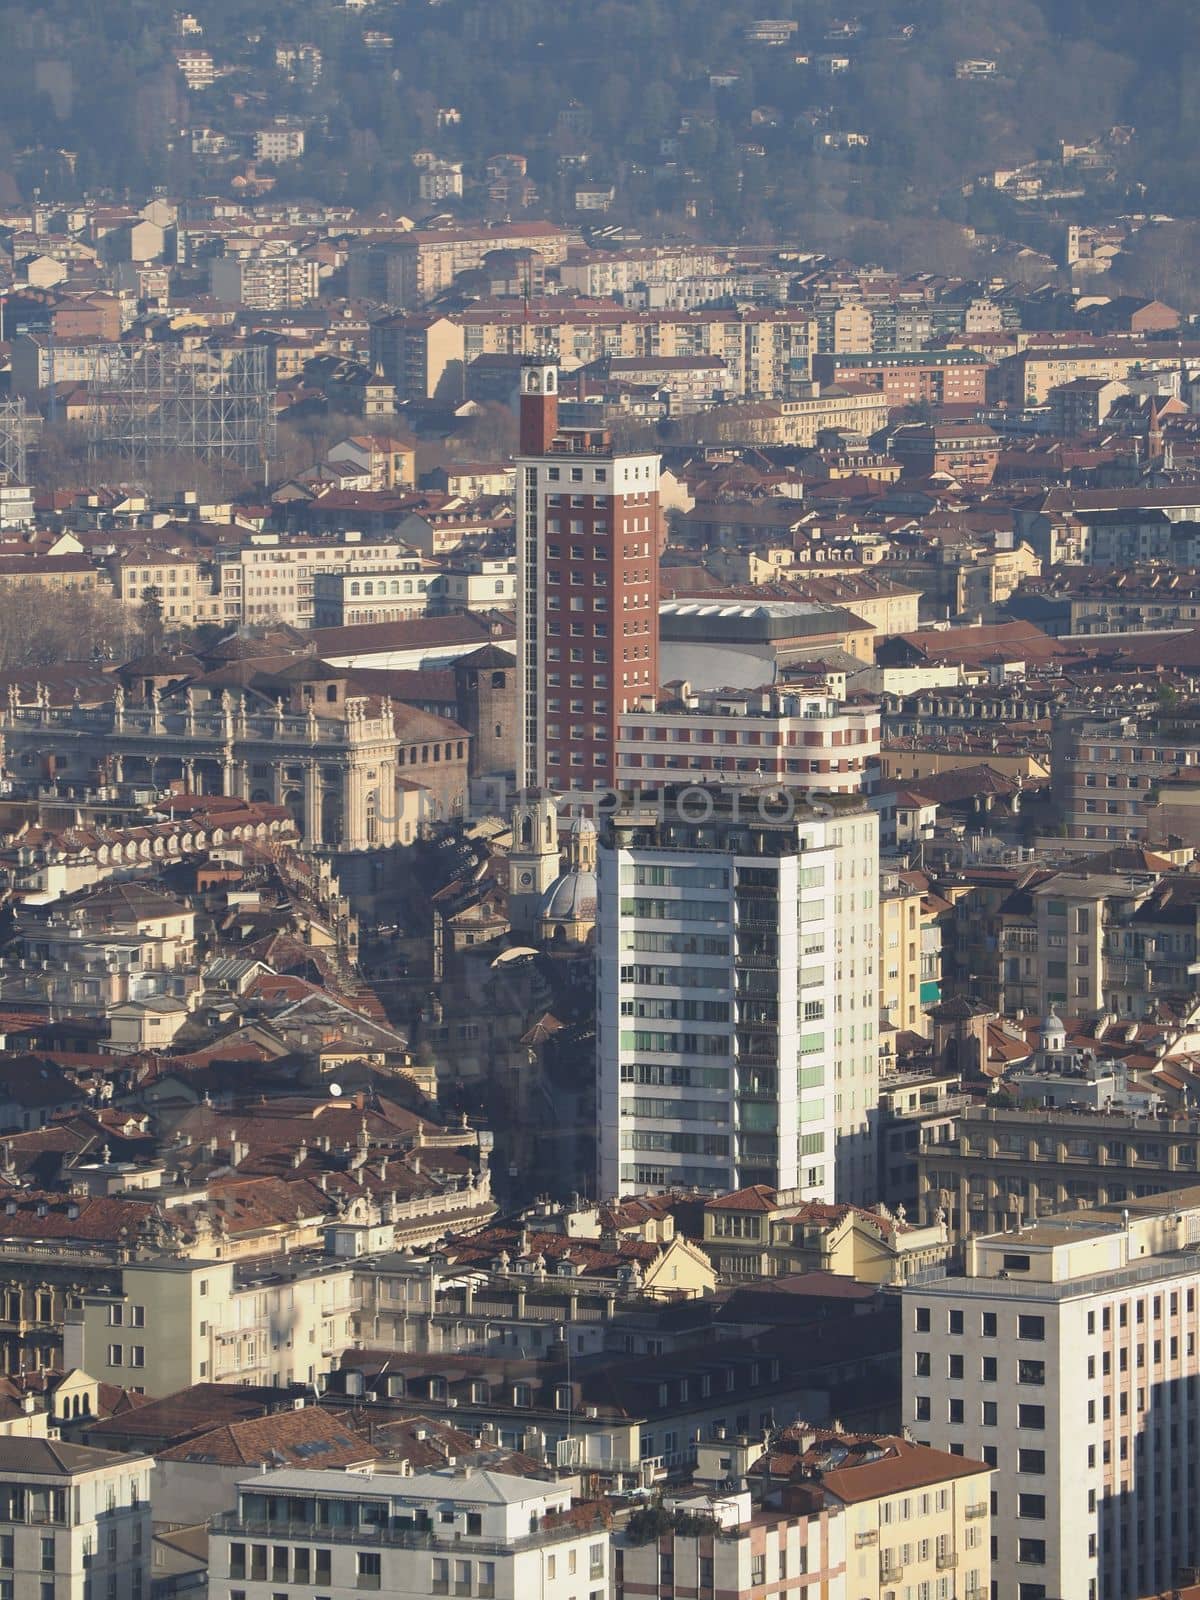 Aerial view of the city centre of Turin, Italy with Piazza Castello square